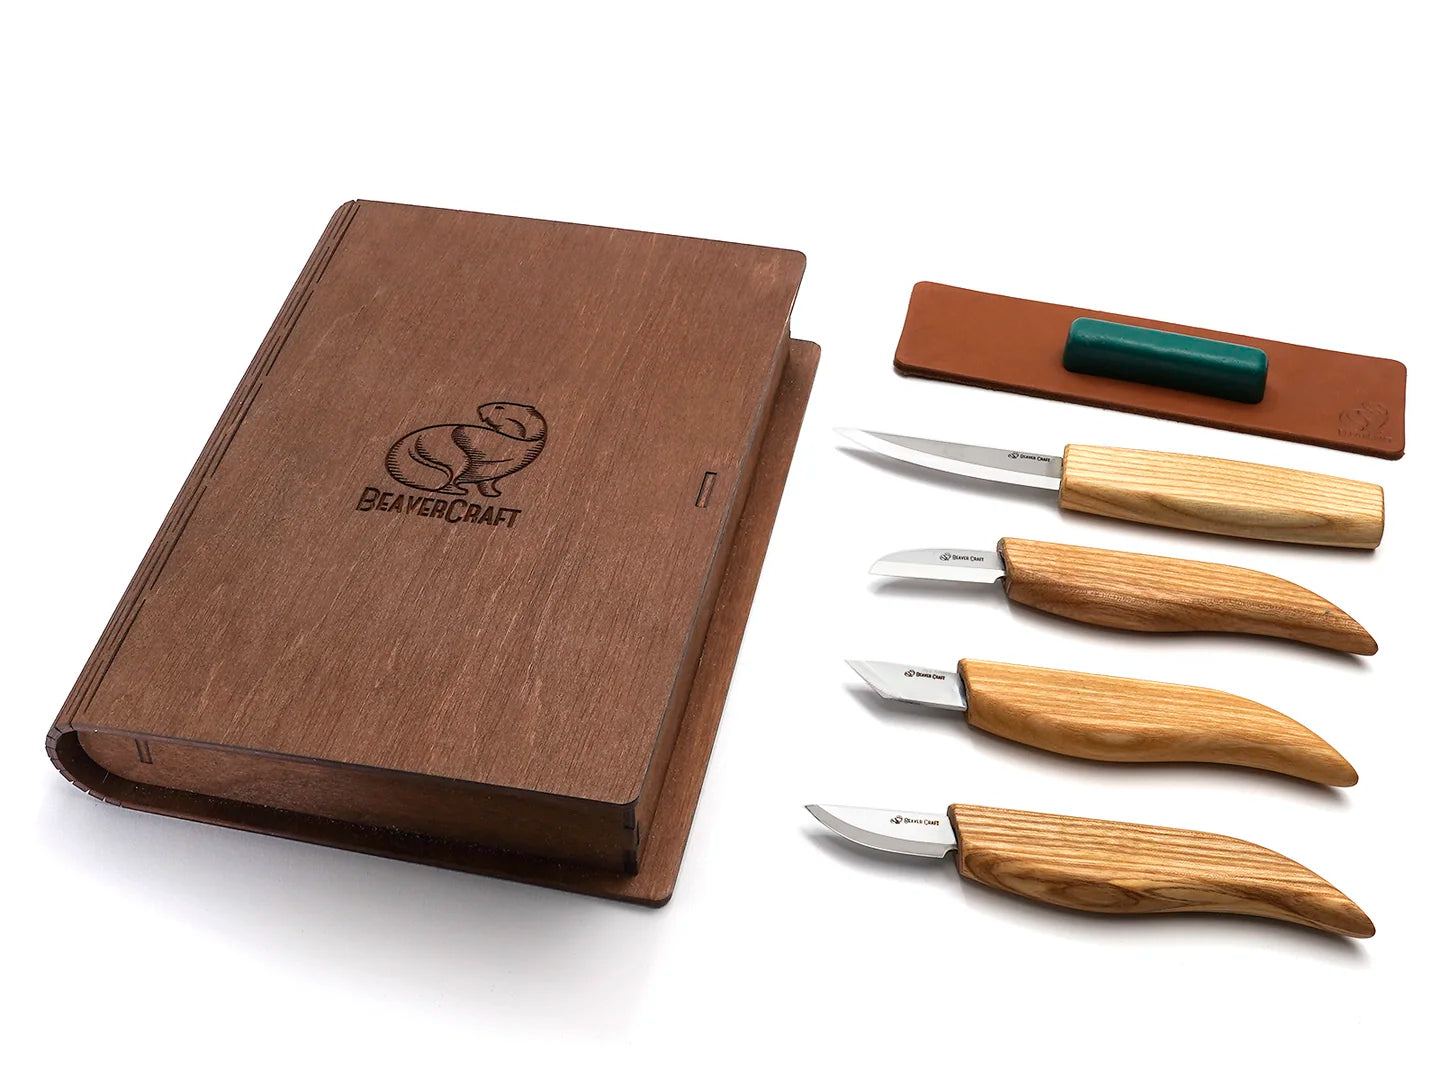 BeaverCraft Spoon Carving Set of 4 S19 Book, wood carving set with wooden  storage book